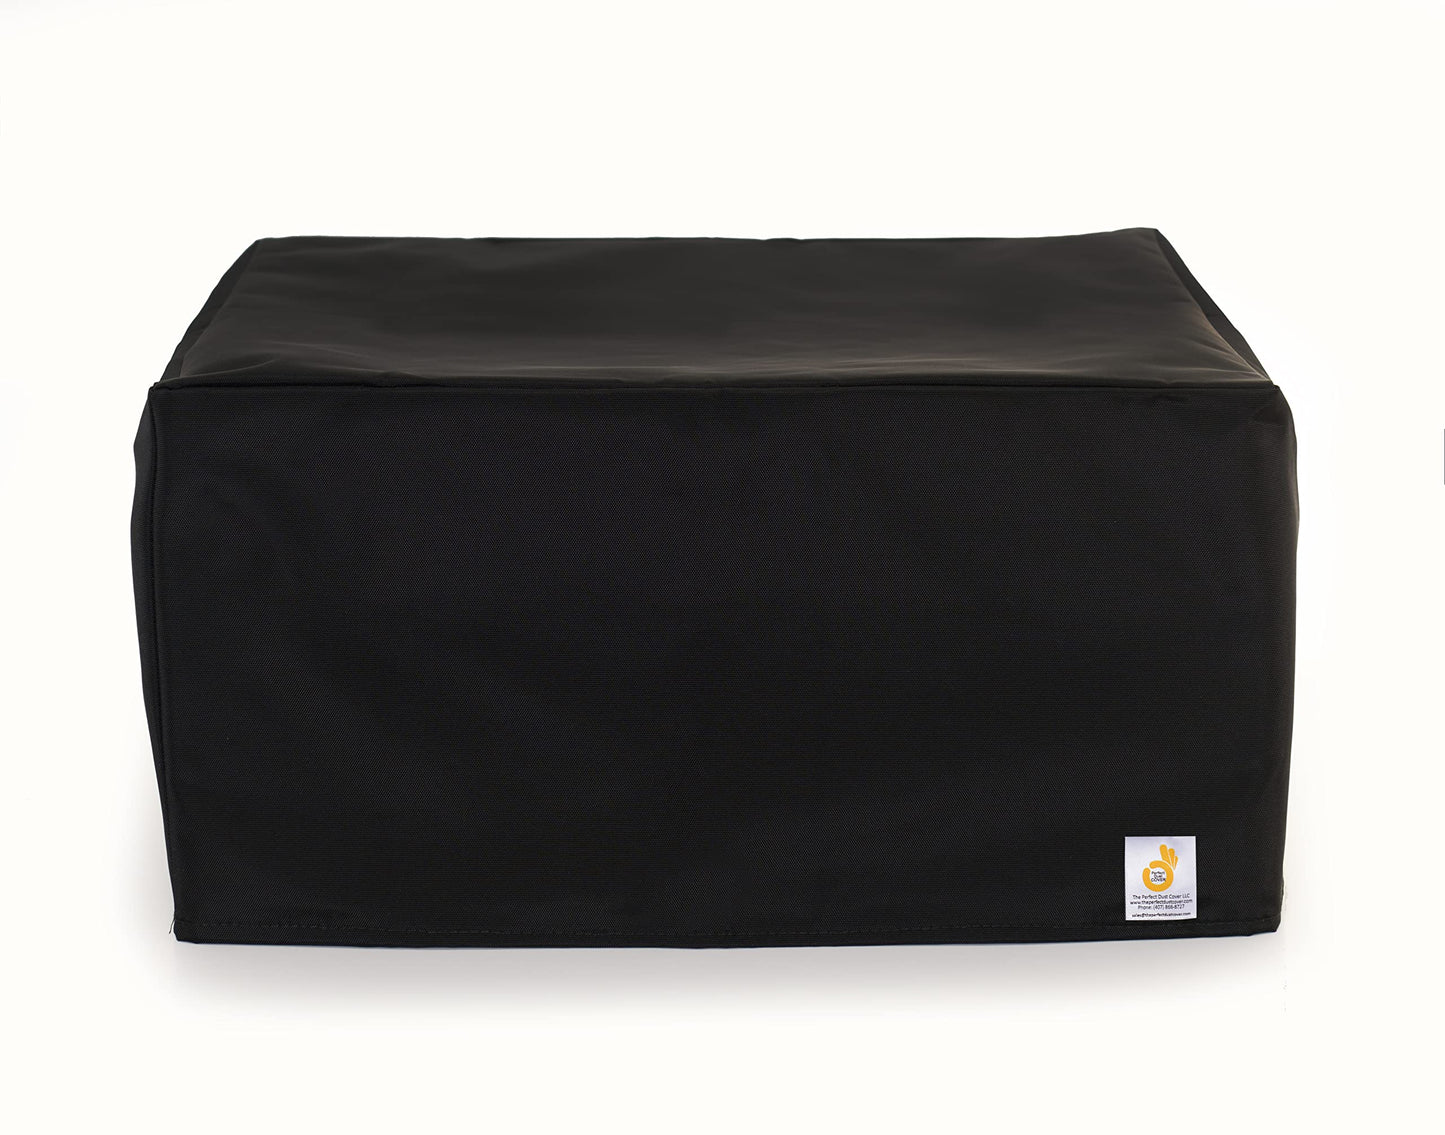 The Perfect Dust Cover, Black Nylon Cover Compatible with Formlabs Form 4 3D Laser Printer, Anti-Static, Double Stitched and Waterproof Dust Cover Dimensions 15.7''W x 14.5''D x 21.9''H by Perfect Dust Cover LLC